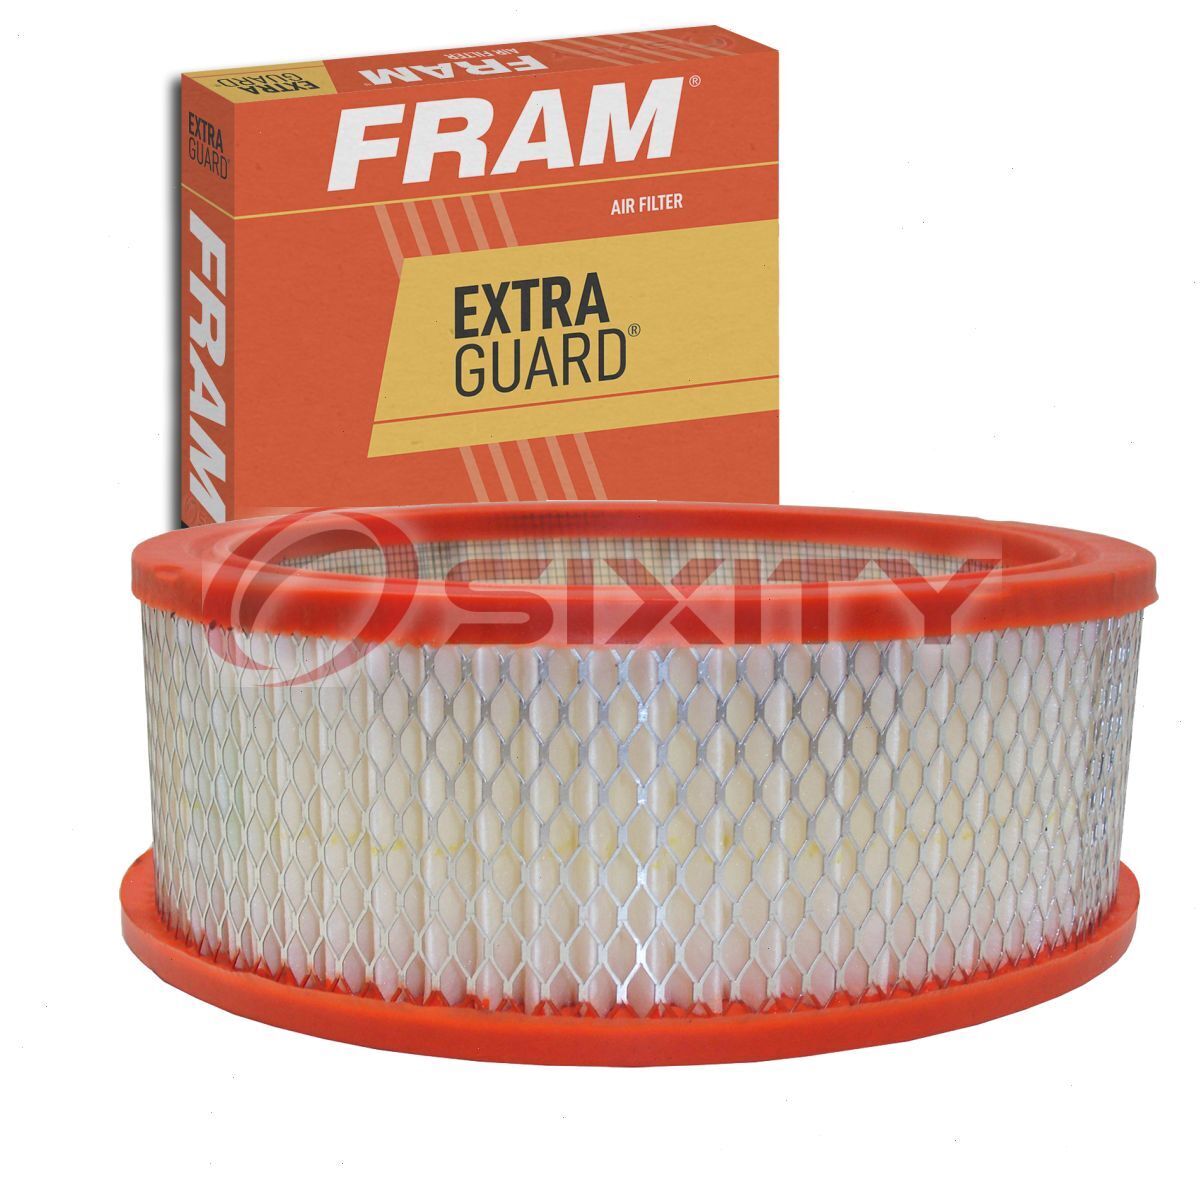 FRAM Extra Guard Air Filter for 1976-1980 Plymouth Volare Intake Inlet ar